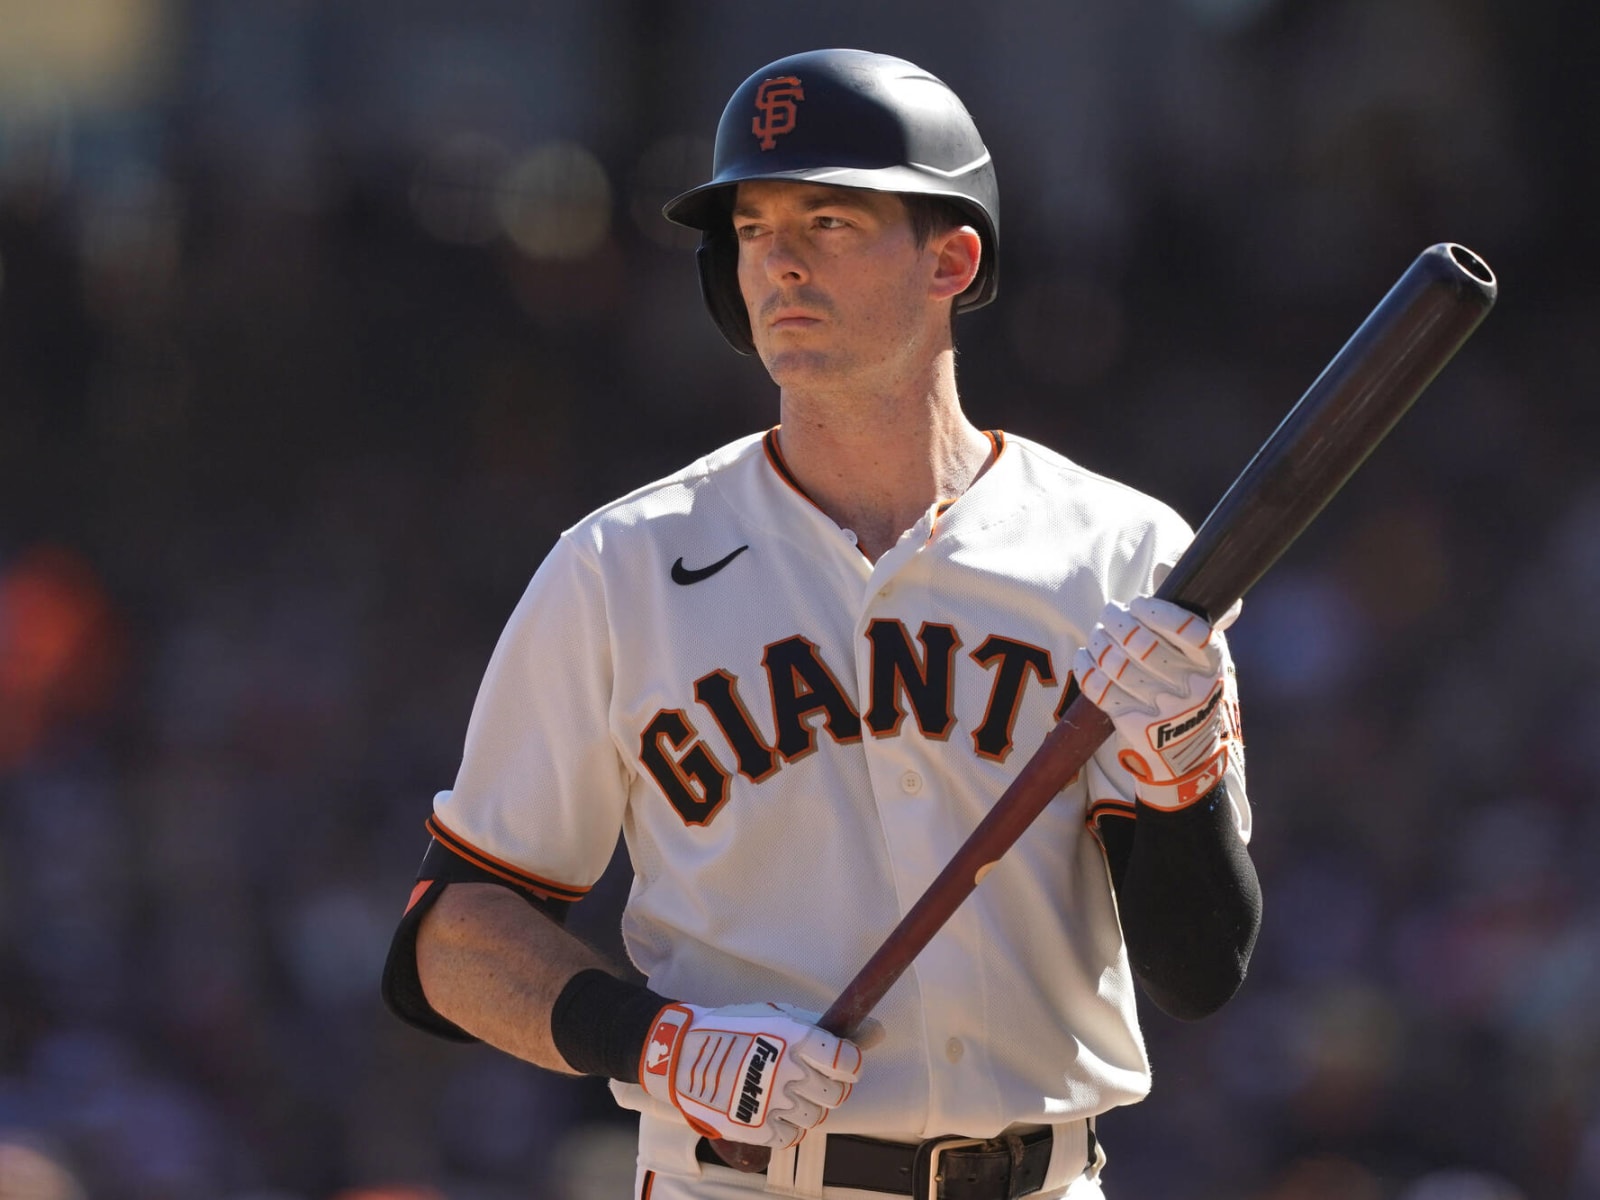 After nearly being sent back to minors, Mike Yastrzemski is making Giants  history – Daily Democrat